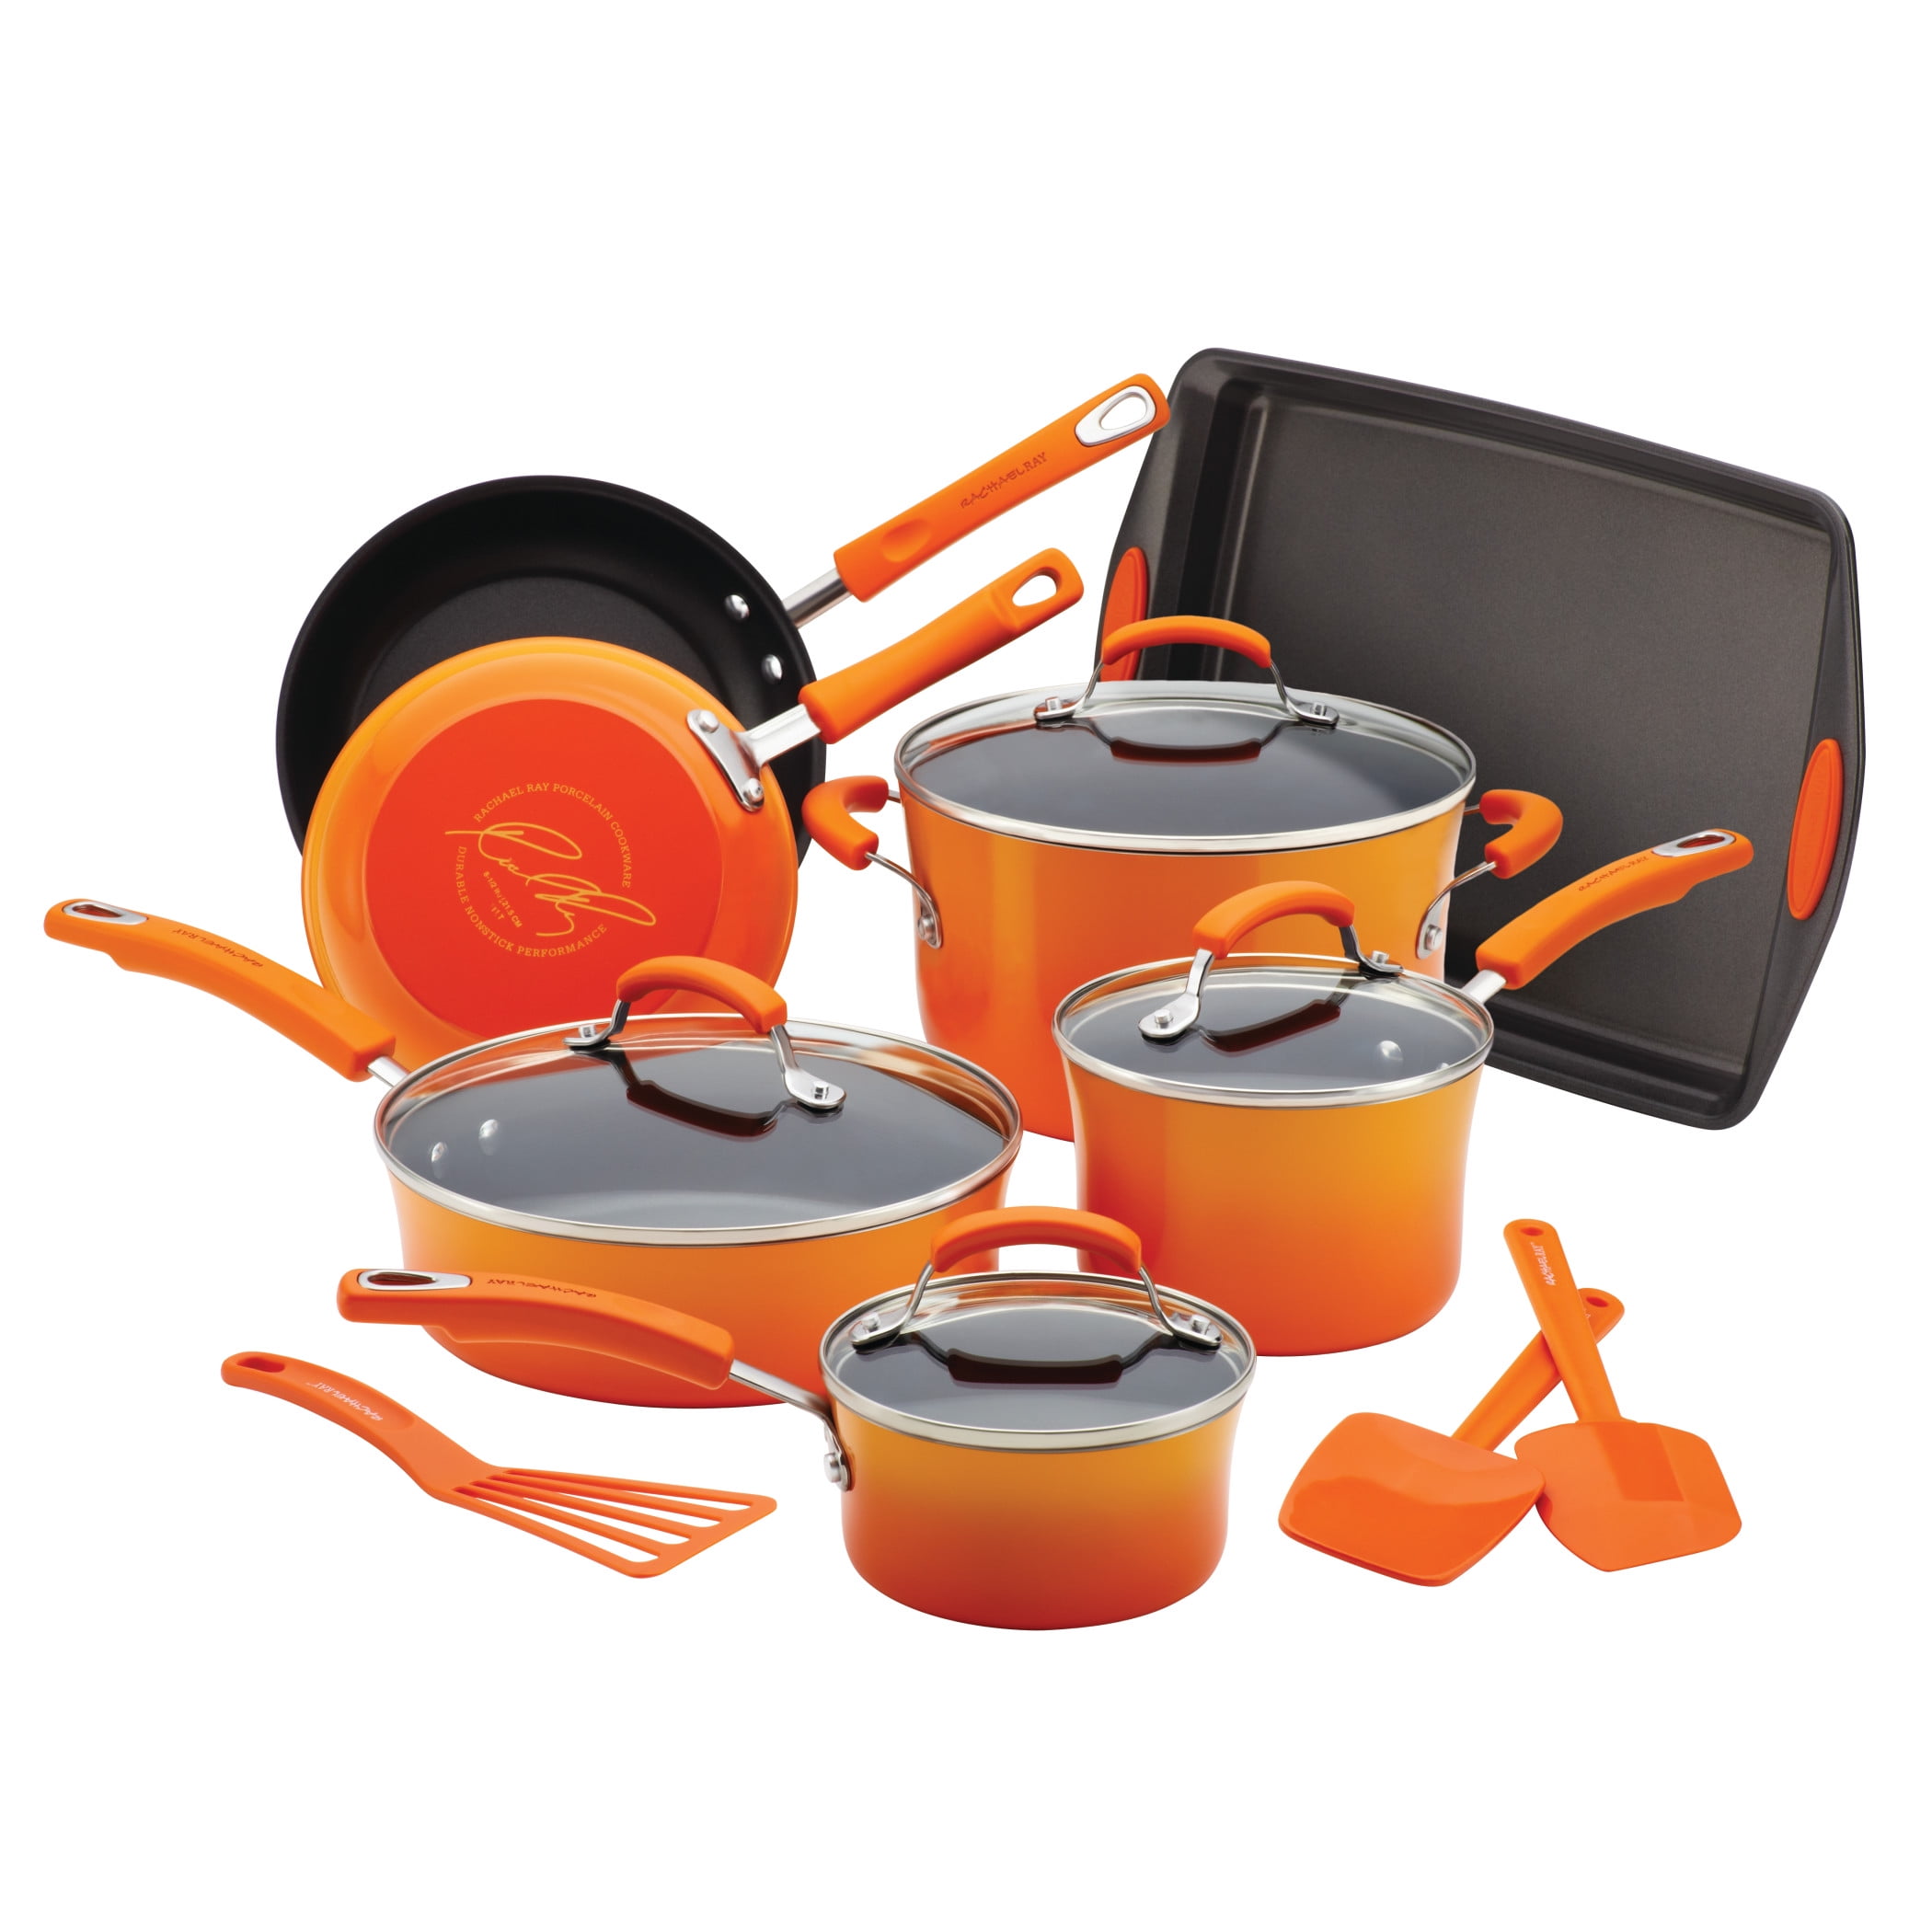 Rachael Ray Classic Brights Hard Anodized Nonstick Cookware Pots